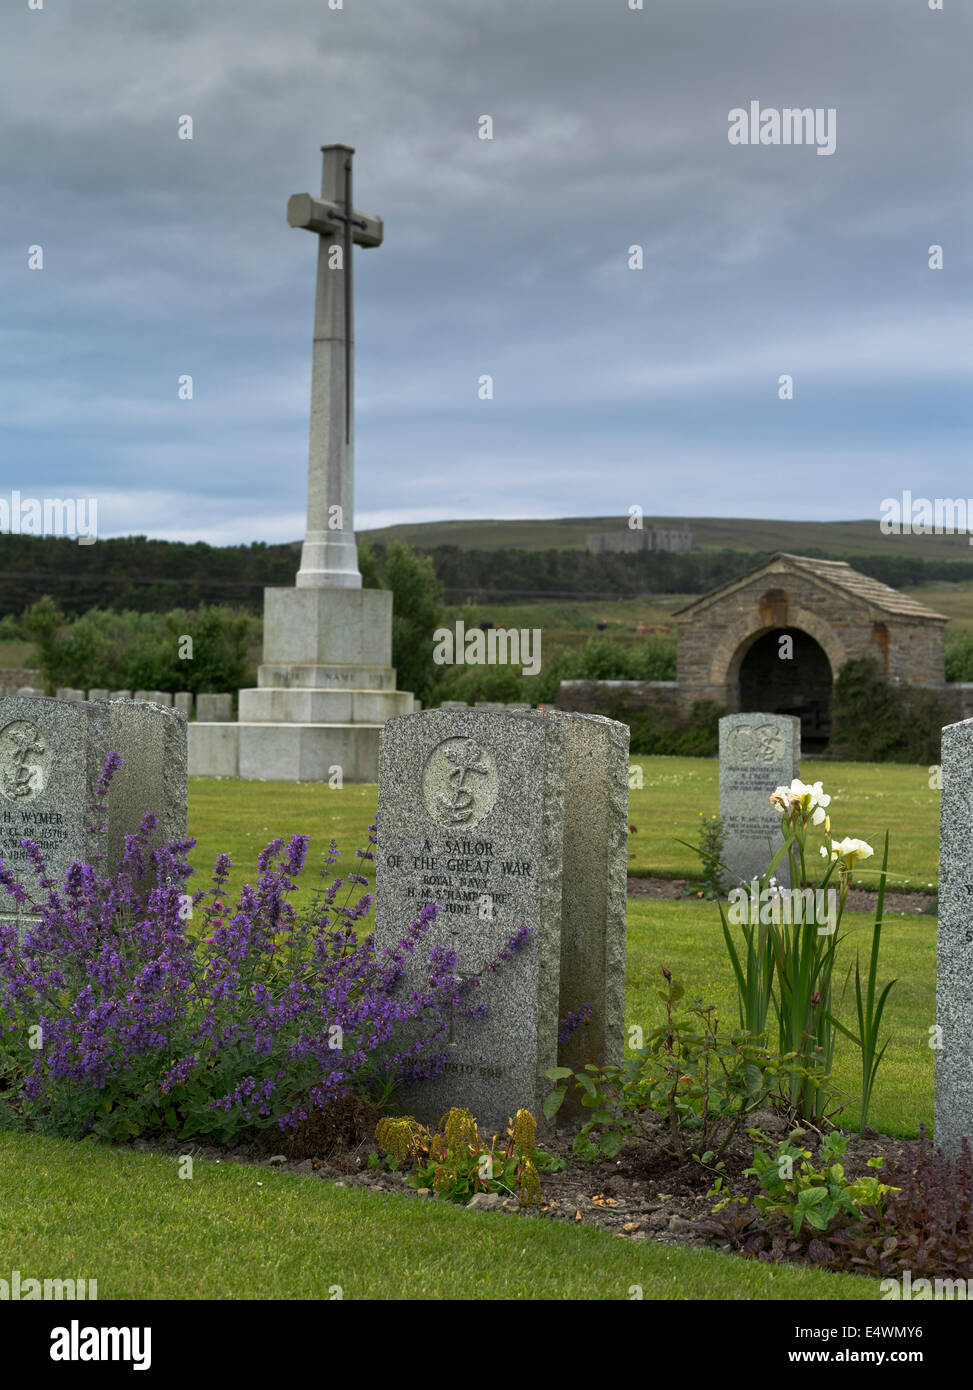 dh Lyness Naval Cemetery HOY ORKNEY World war one cemetery grave stone military cemetery navy cross Stock Photo